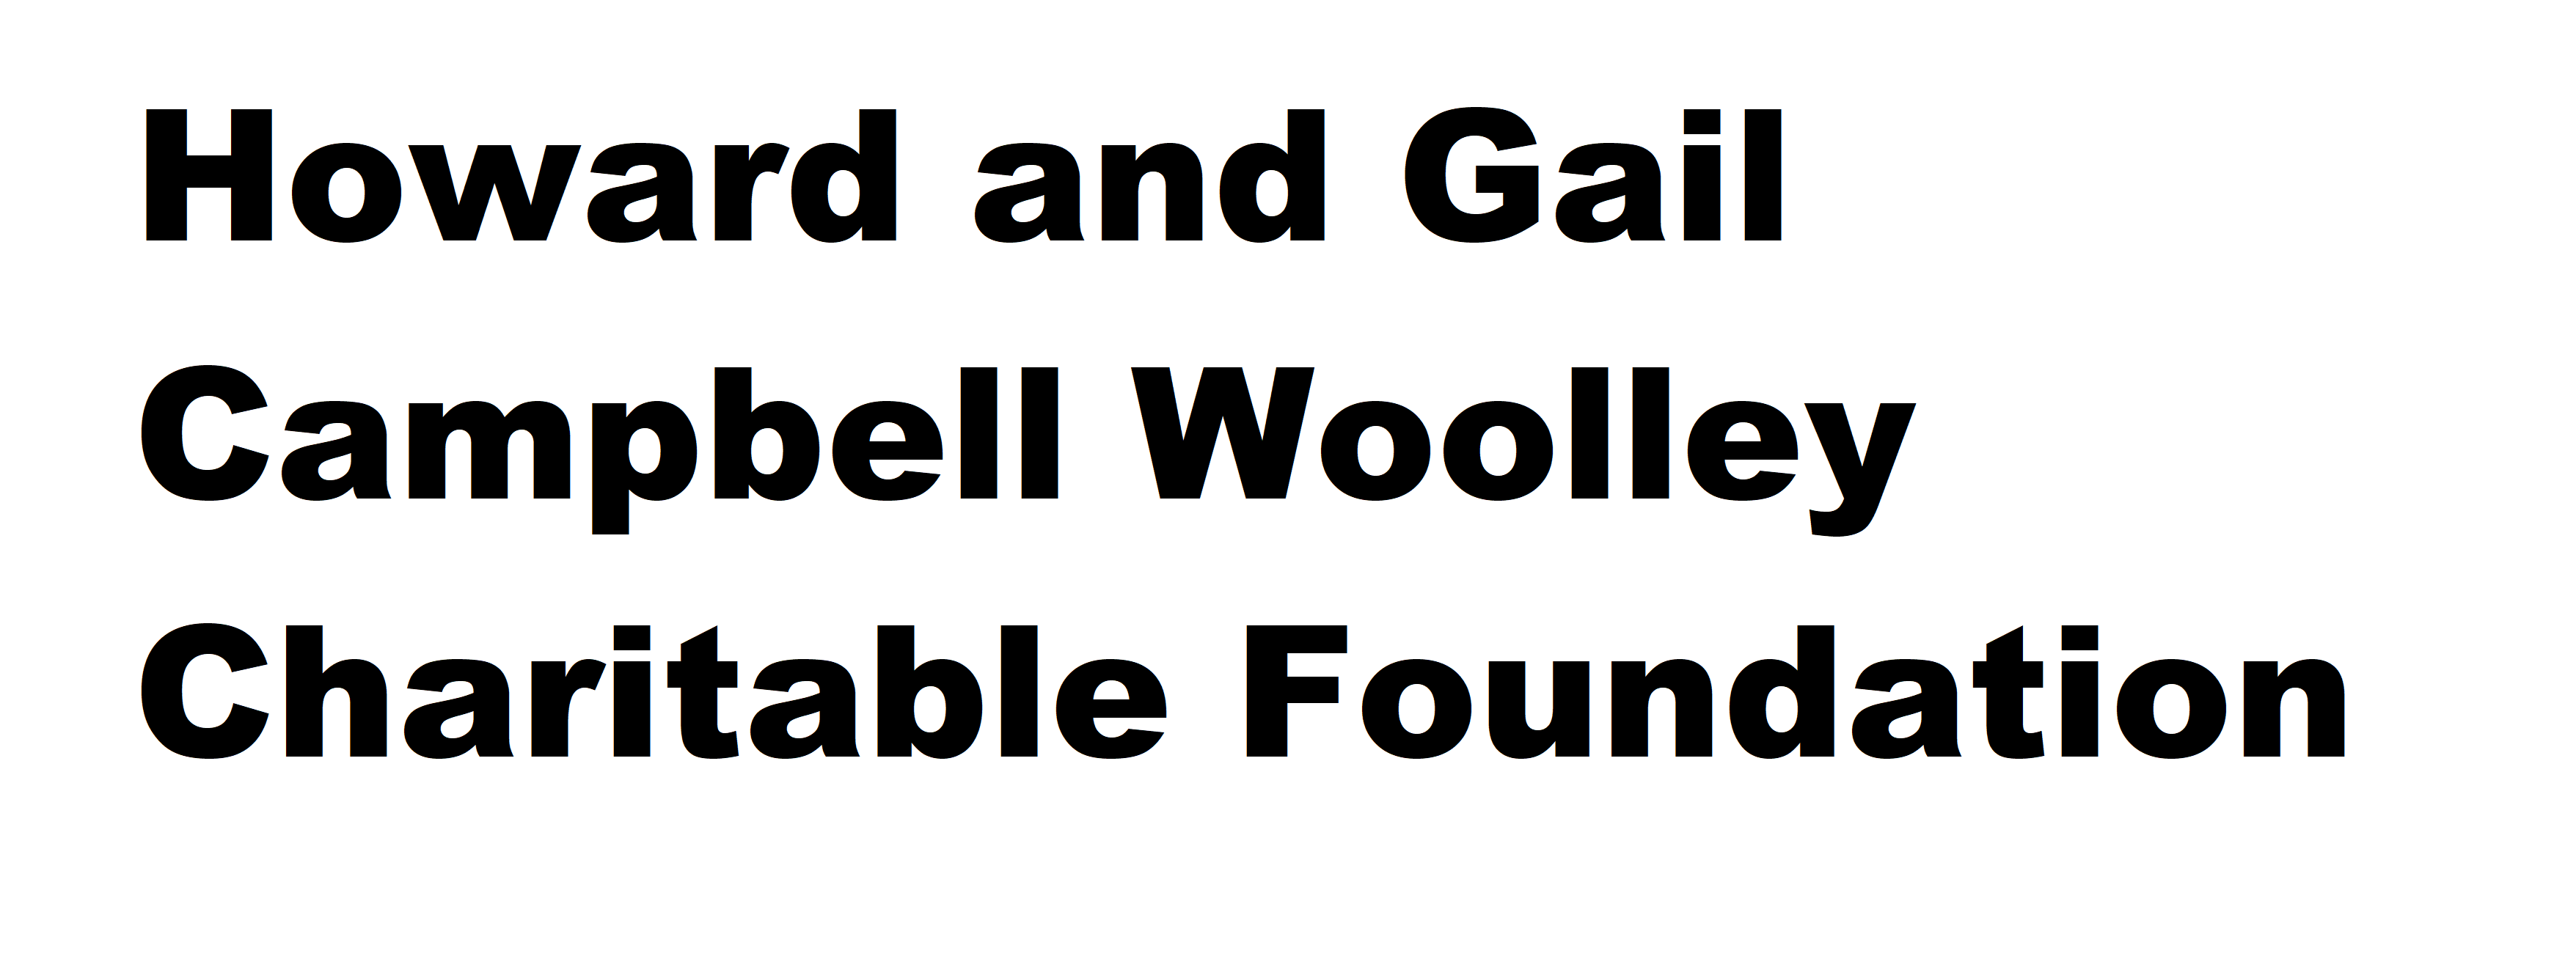 Howard and Gail Campbell Woolley Charitable Foundation